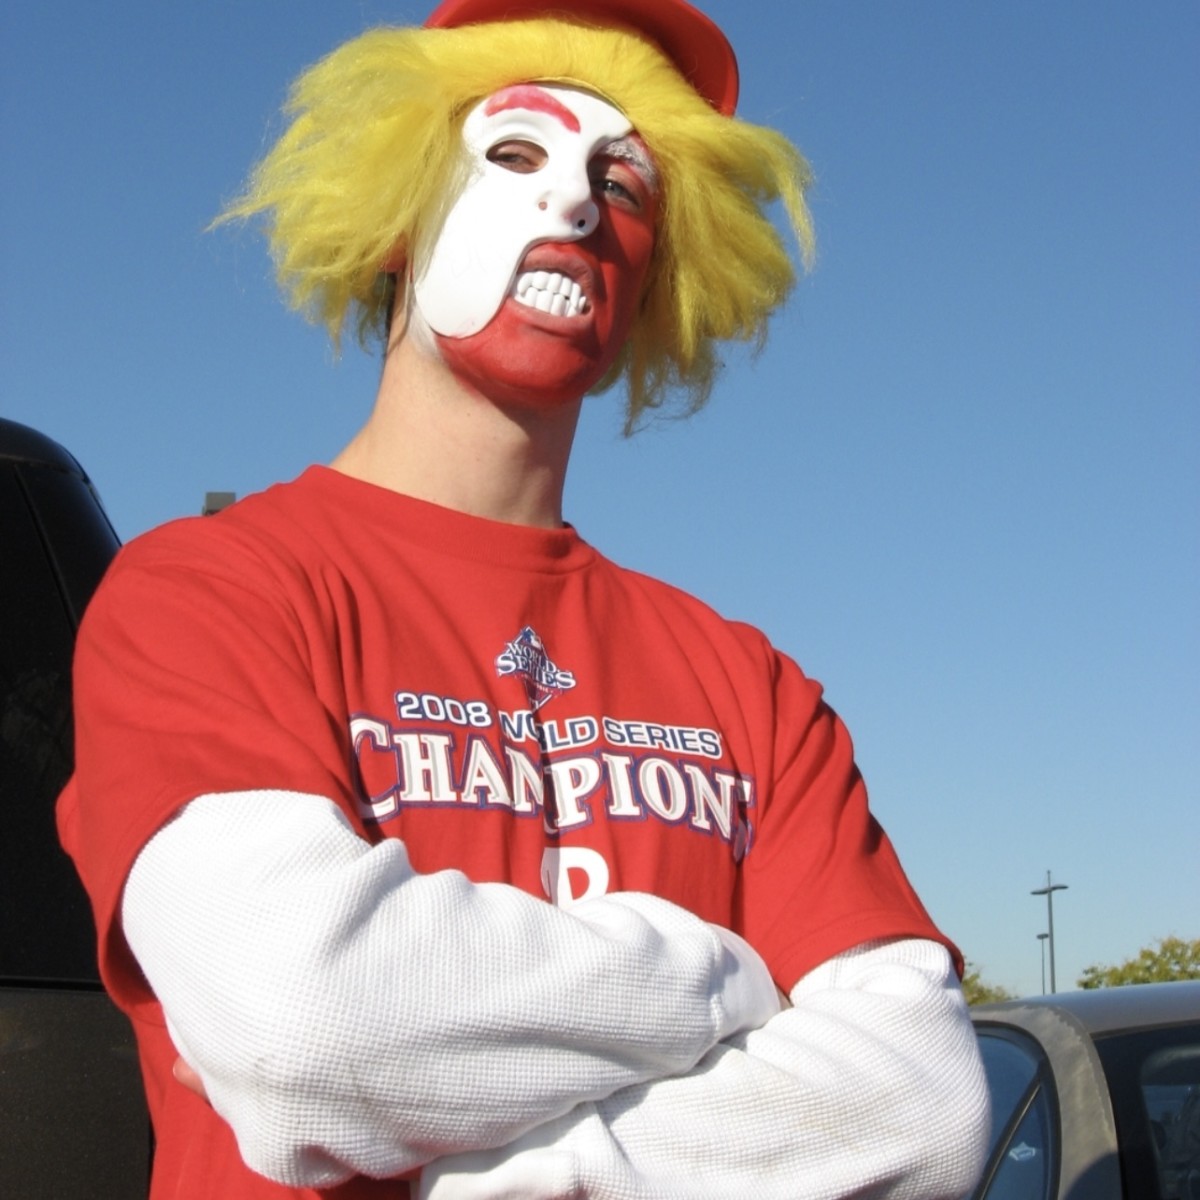 We don't clown around when it comes to sports.